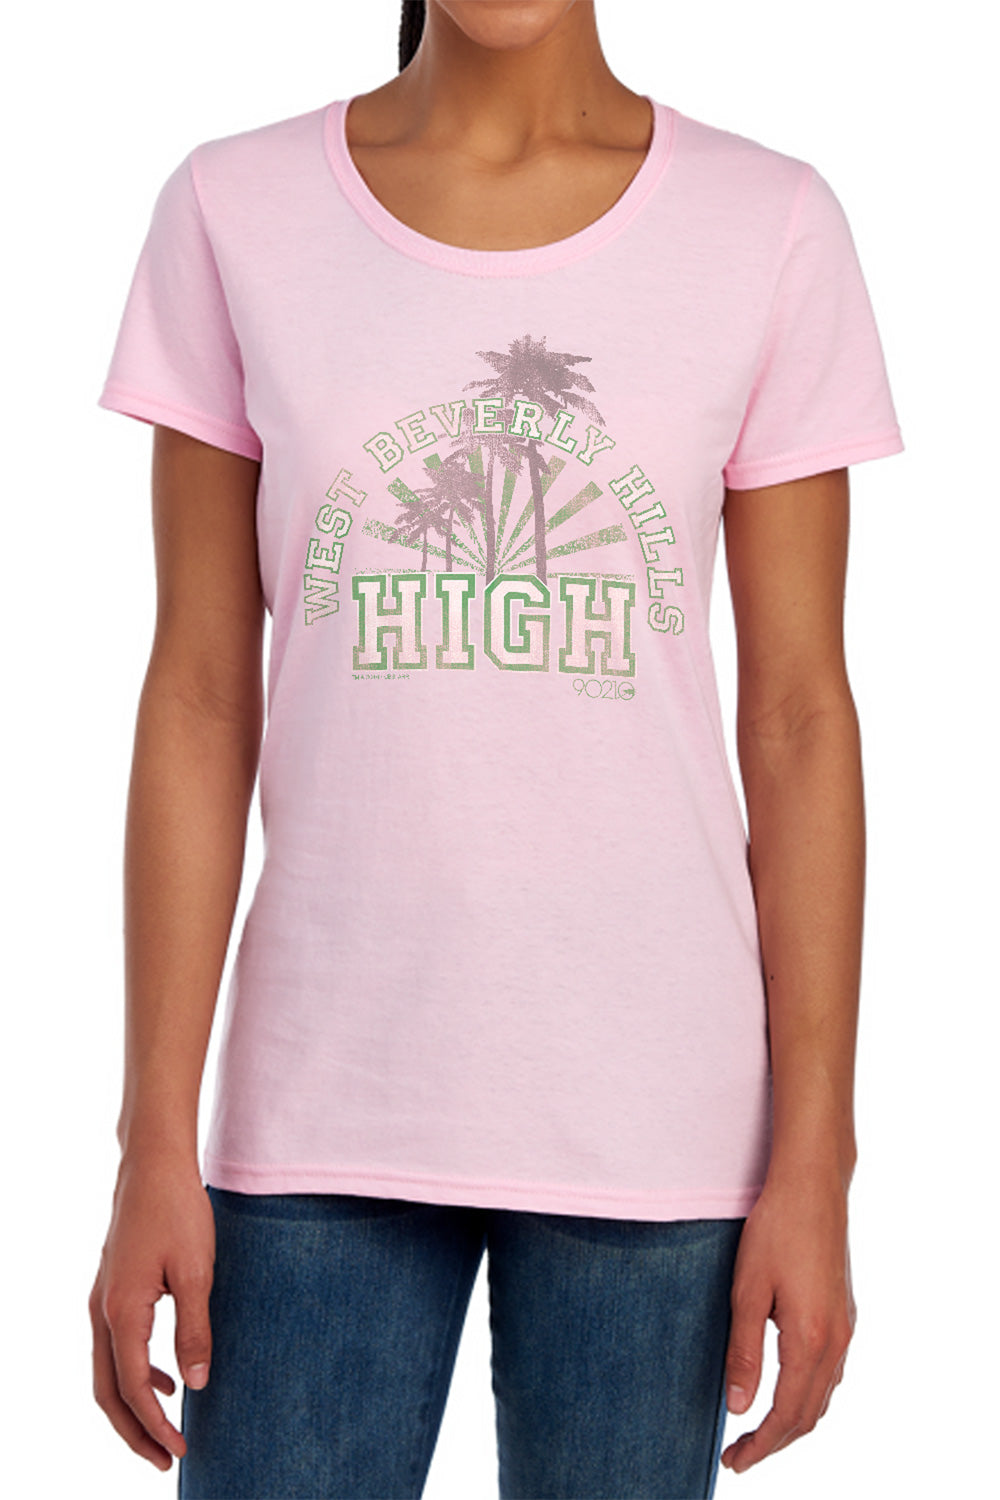 90210 : WEST BEVERLY HILLS HIGH S\S WOMENS TEE PINK 2X